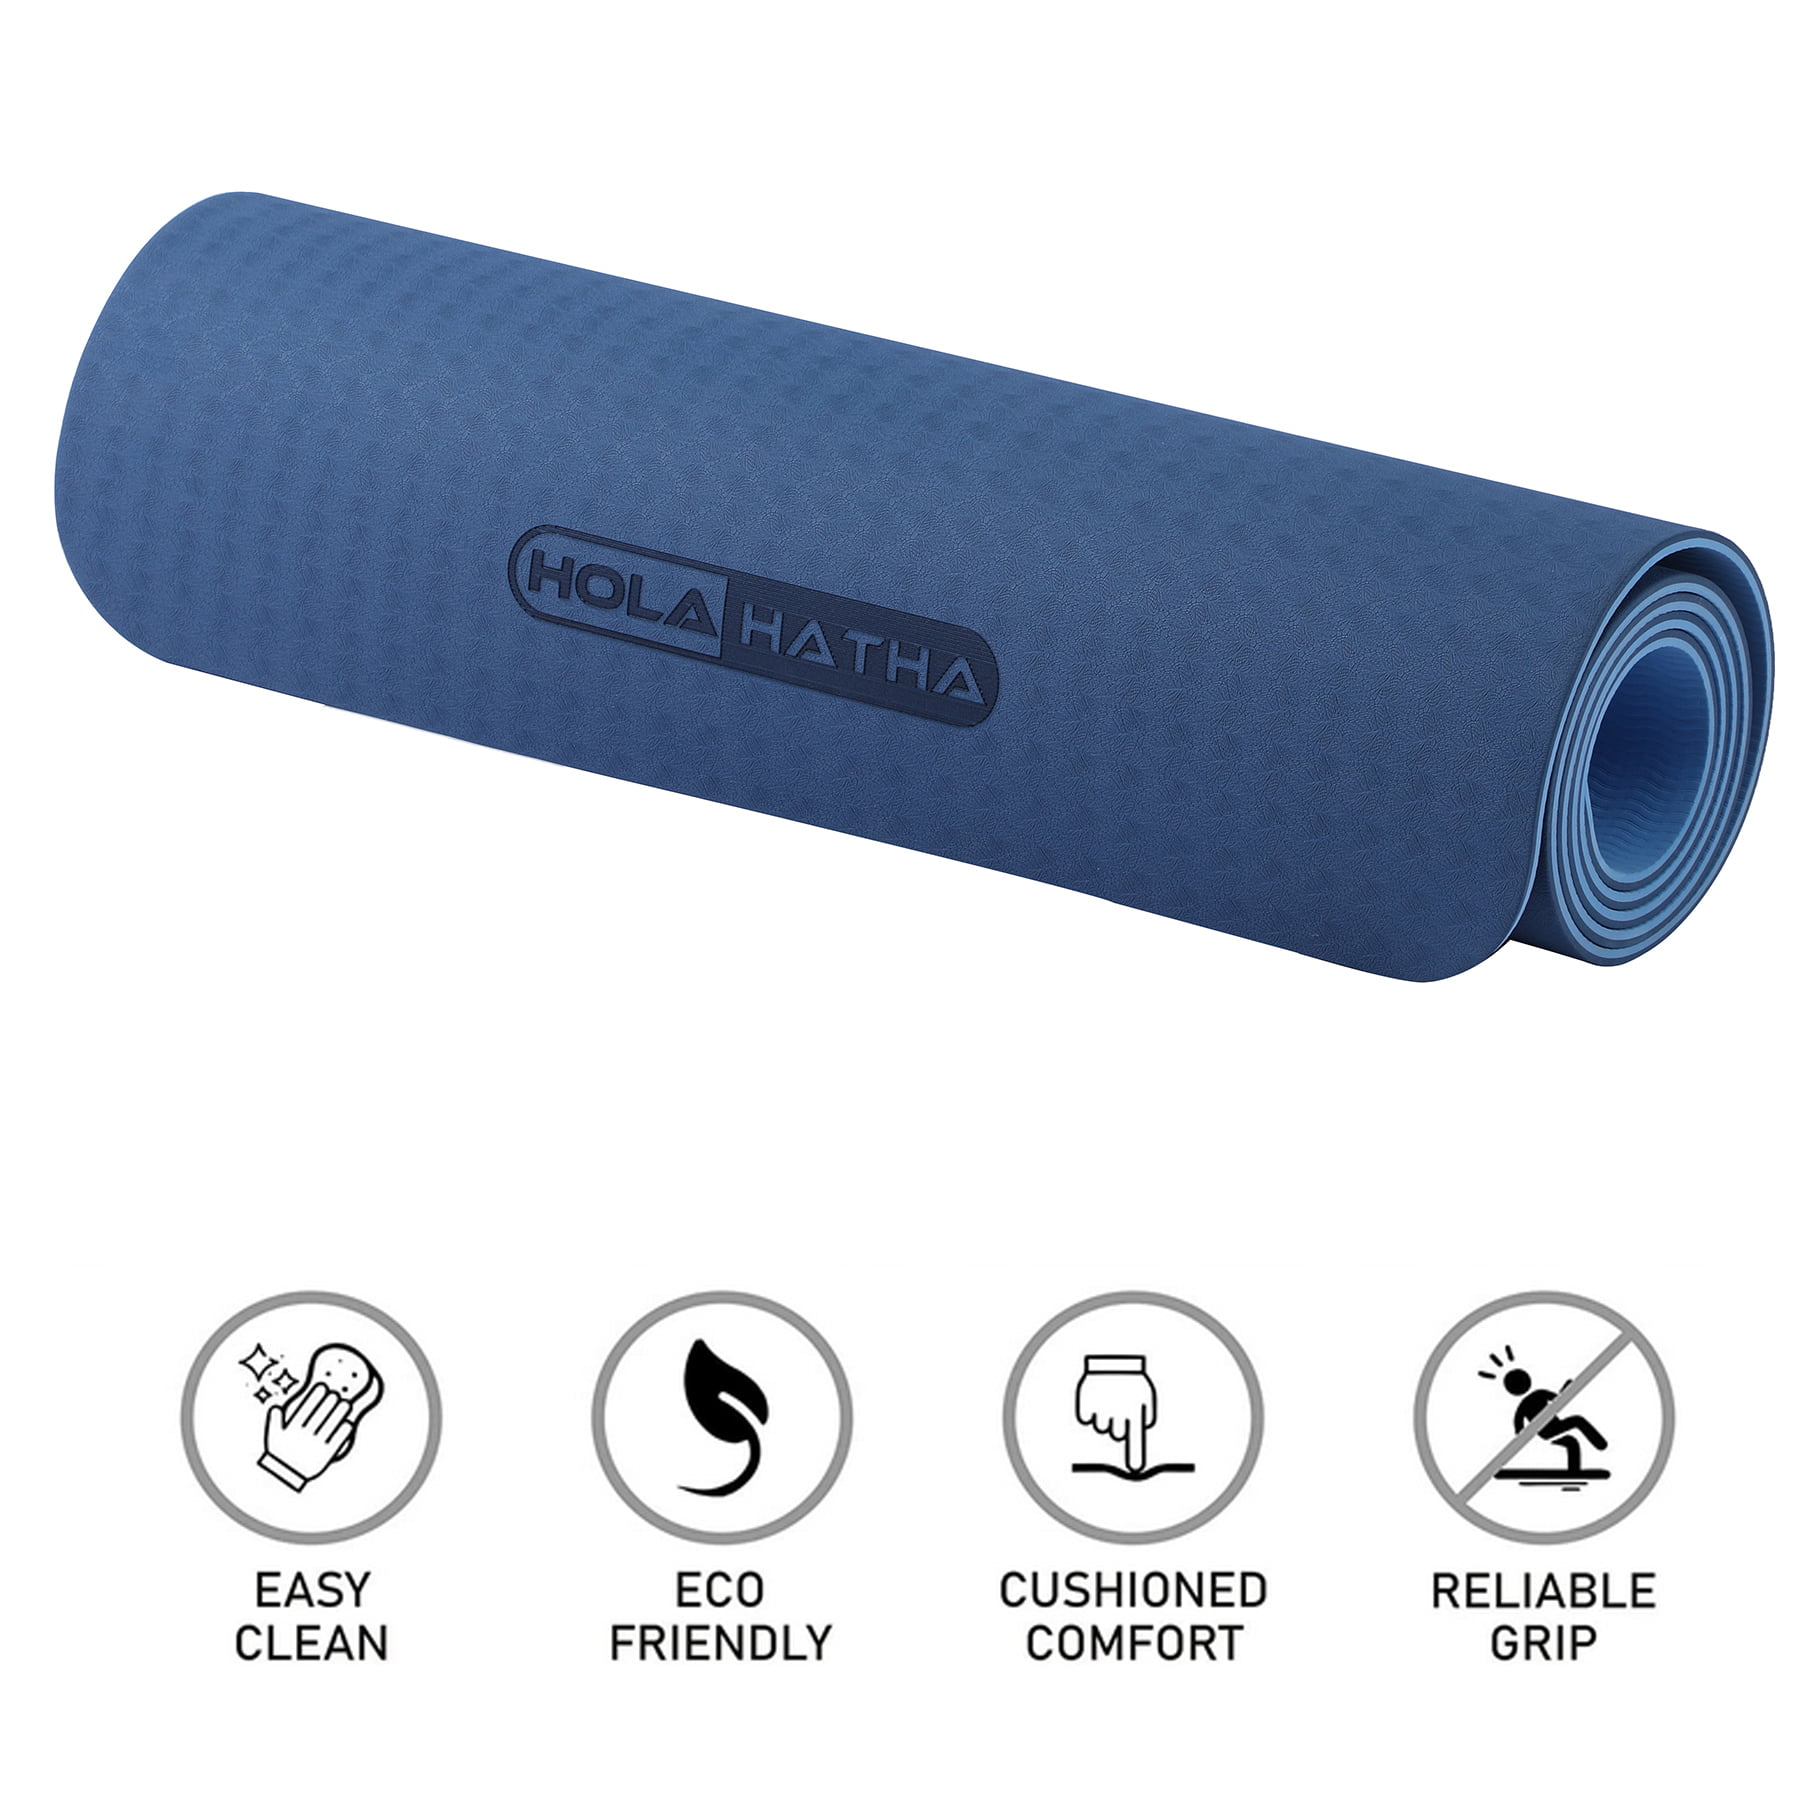  Hatha Yoga Thick TPE Yoga Mat 72x 27x1/3 Inch Non Slip Eco  Friendly Exercise Mat For Yoga Pilates & Floor Workouts